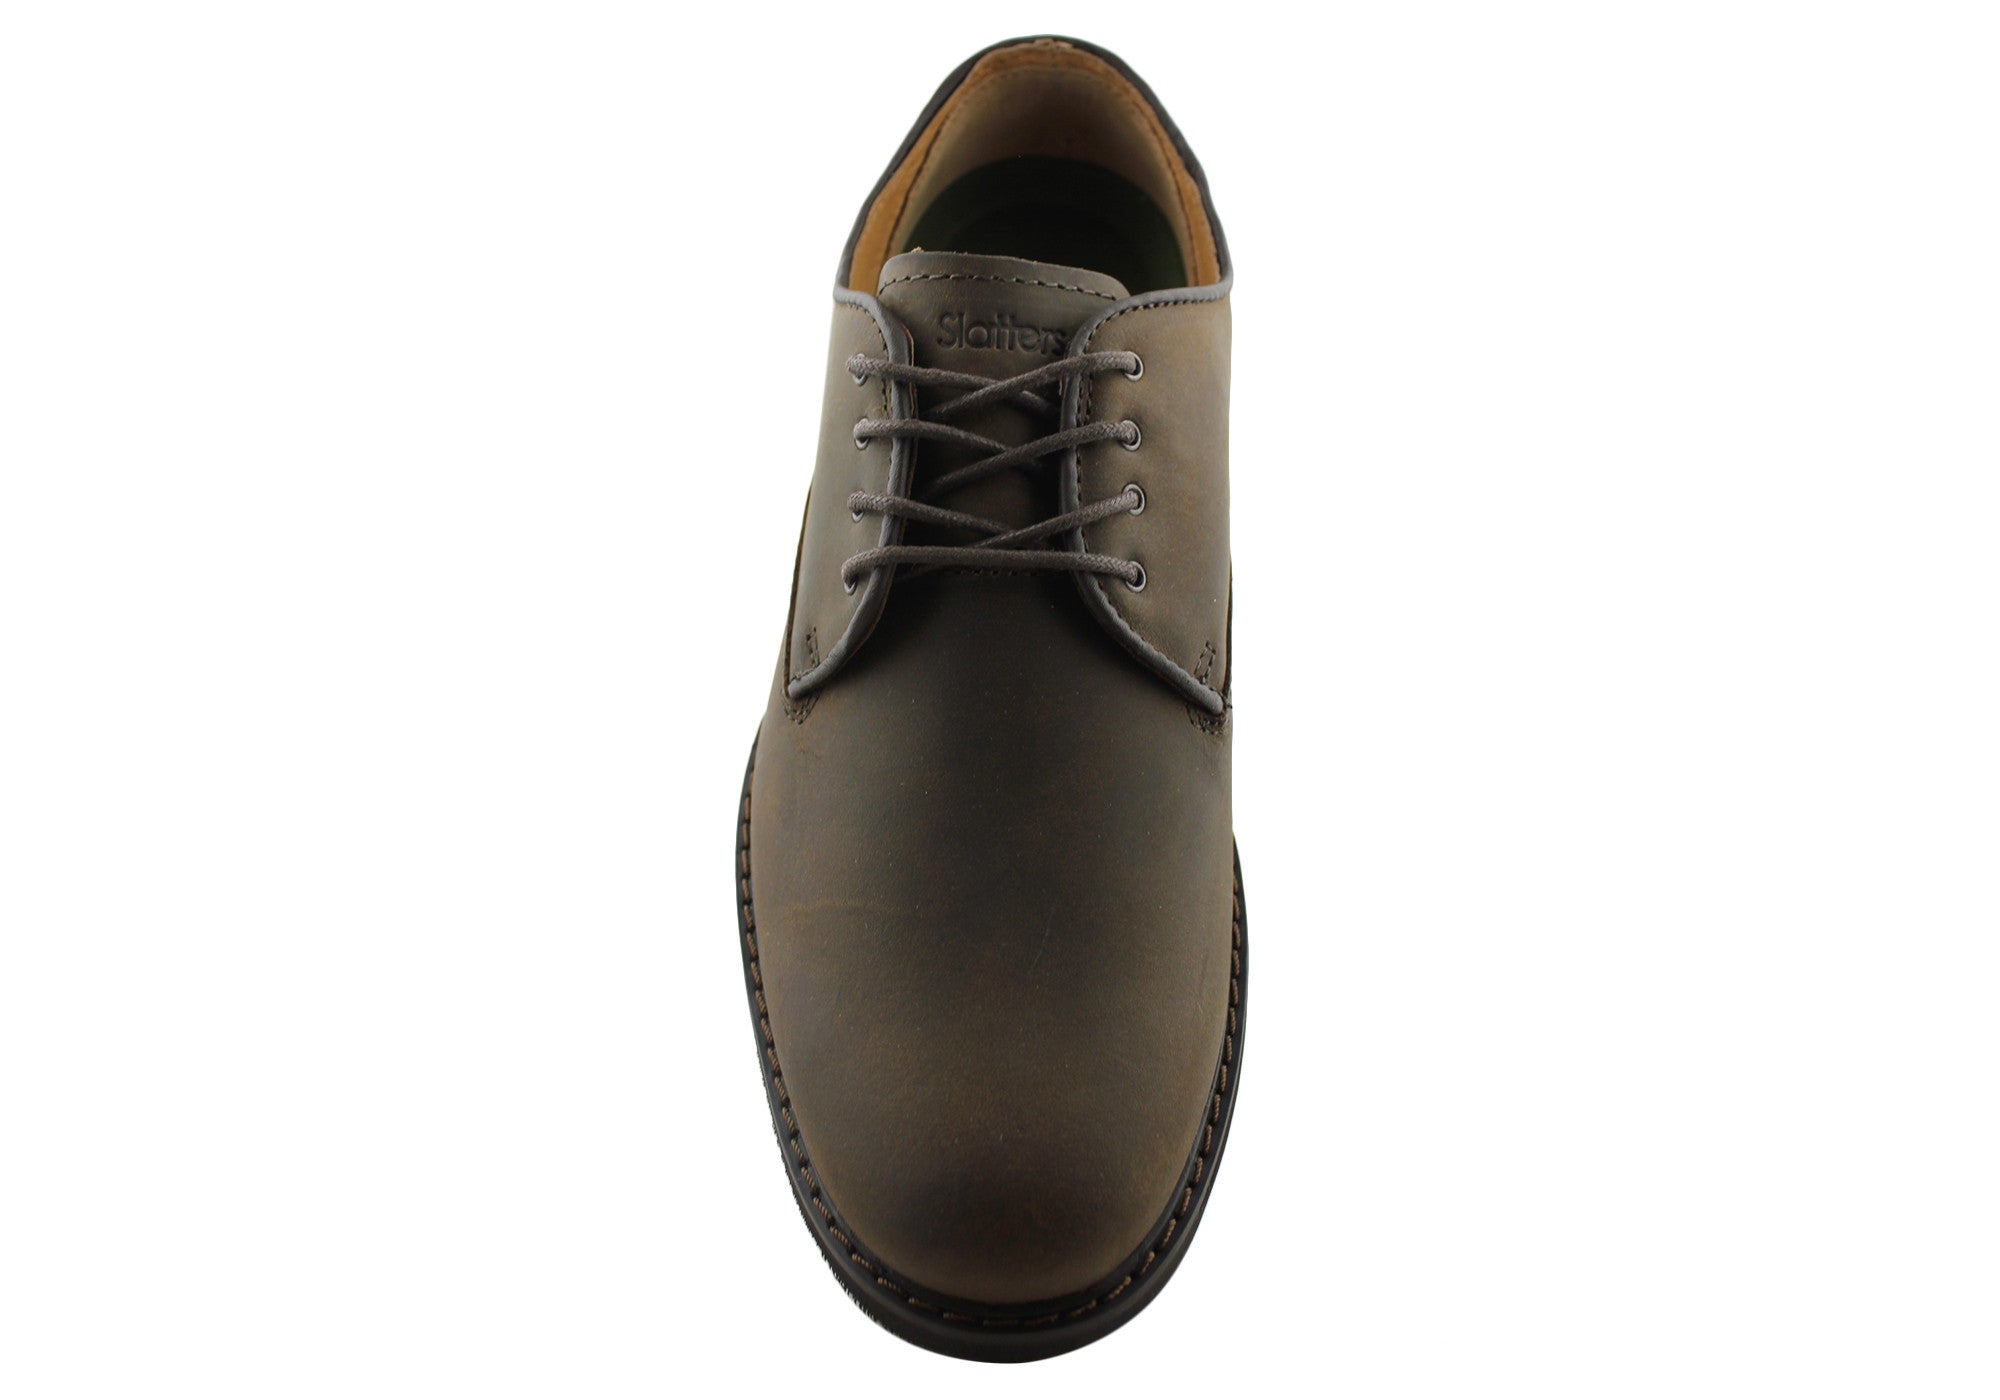 Slatters Telfast Mens Comfortable Leather Lace Up Shoes